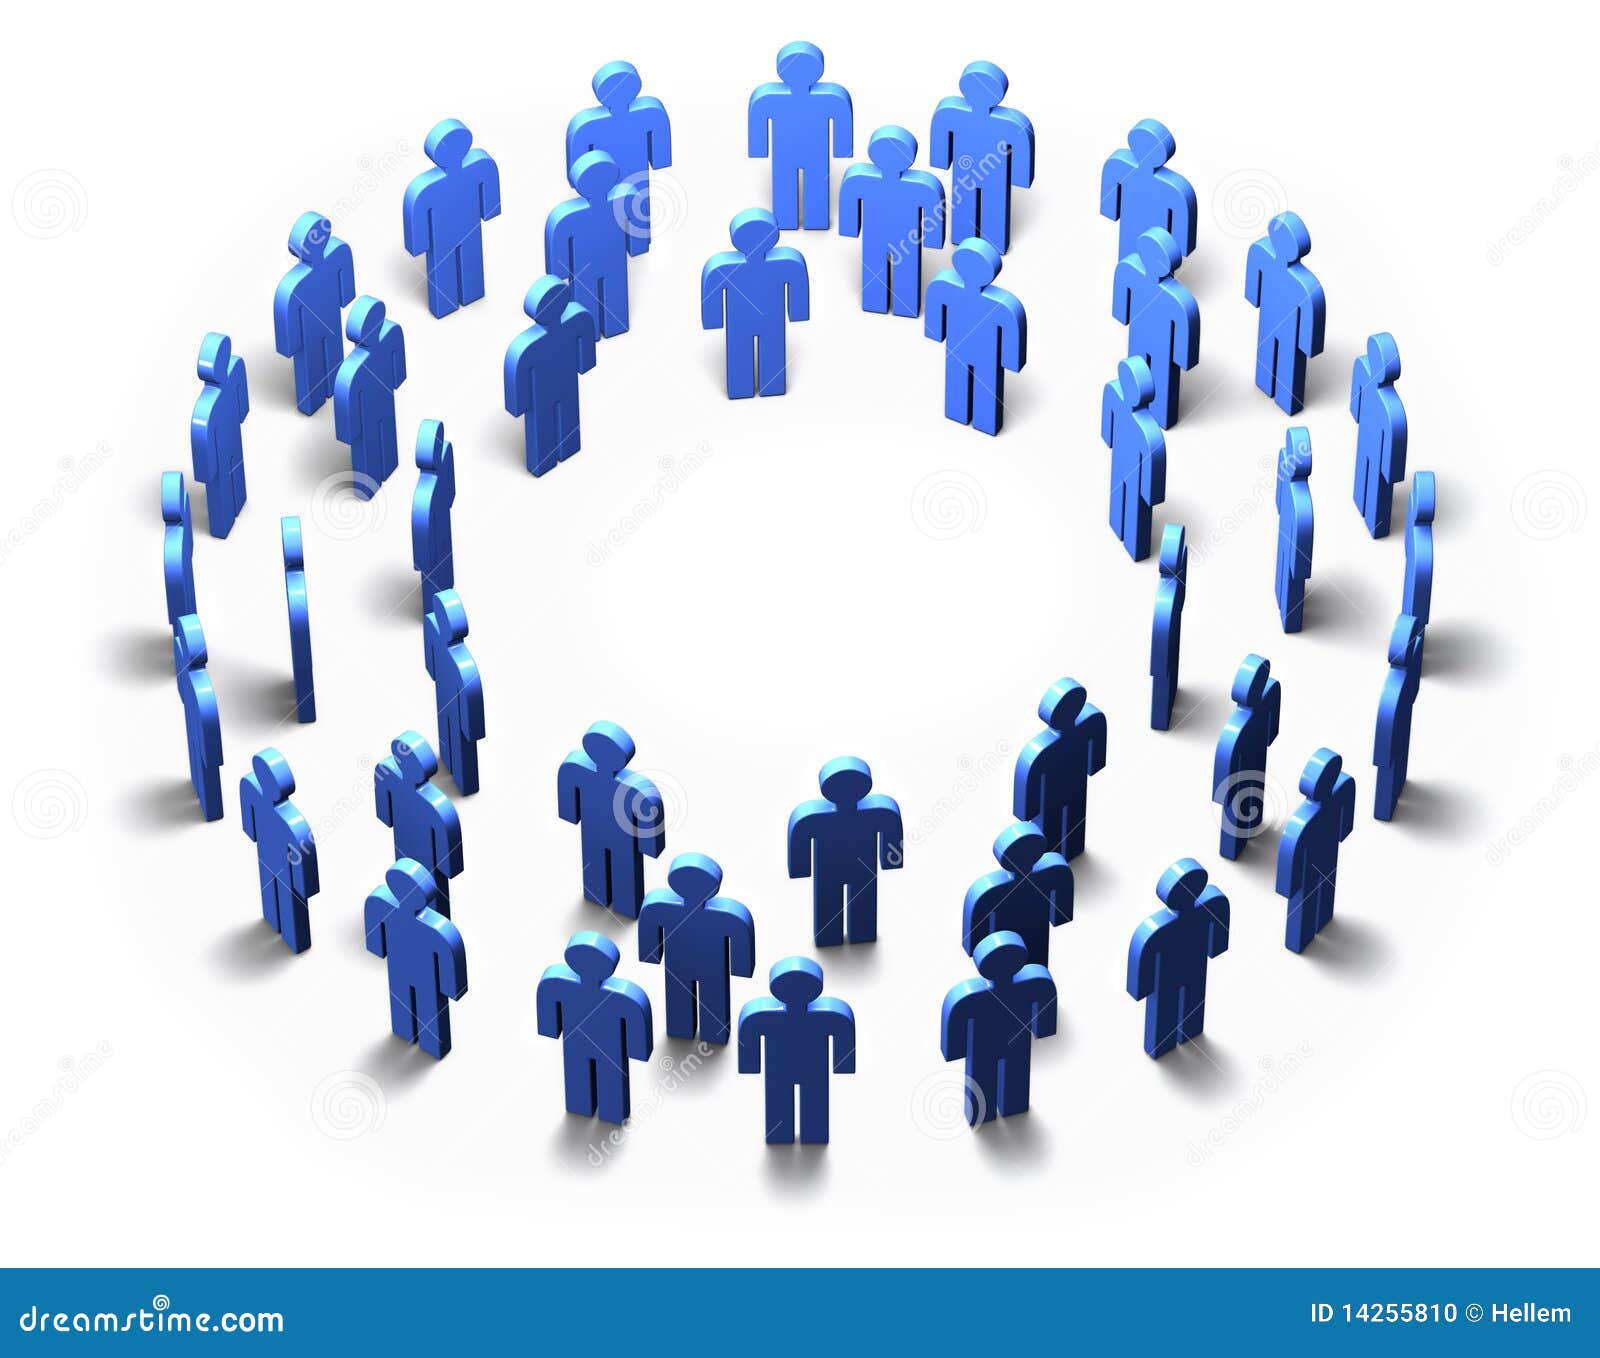 Men - Blue Circle, isolated. Lots of blue 3D men standing in a circle, isolated